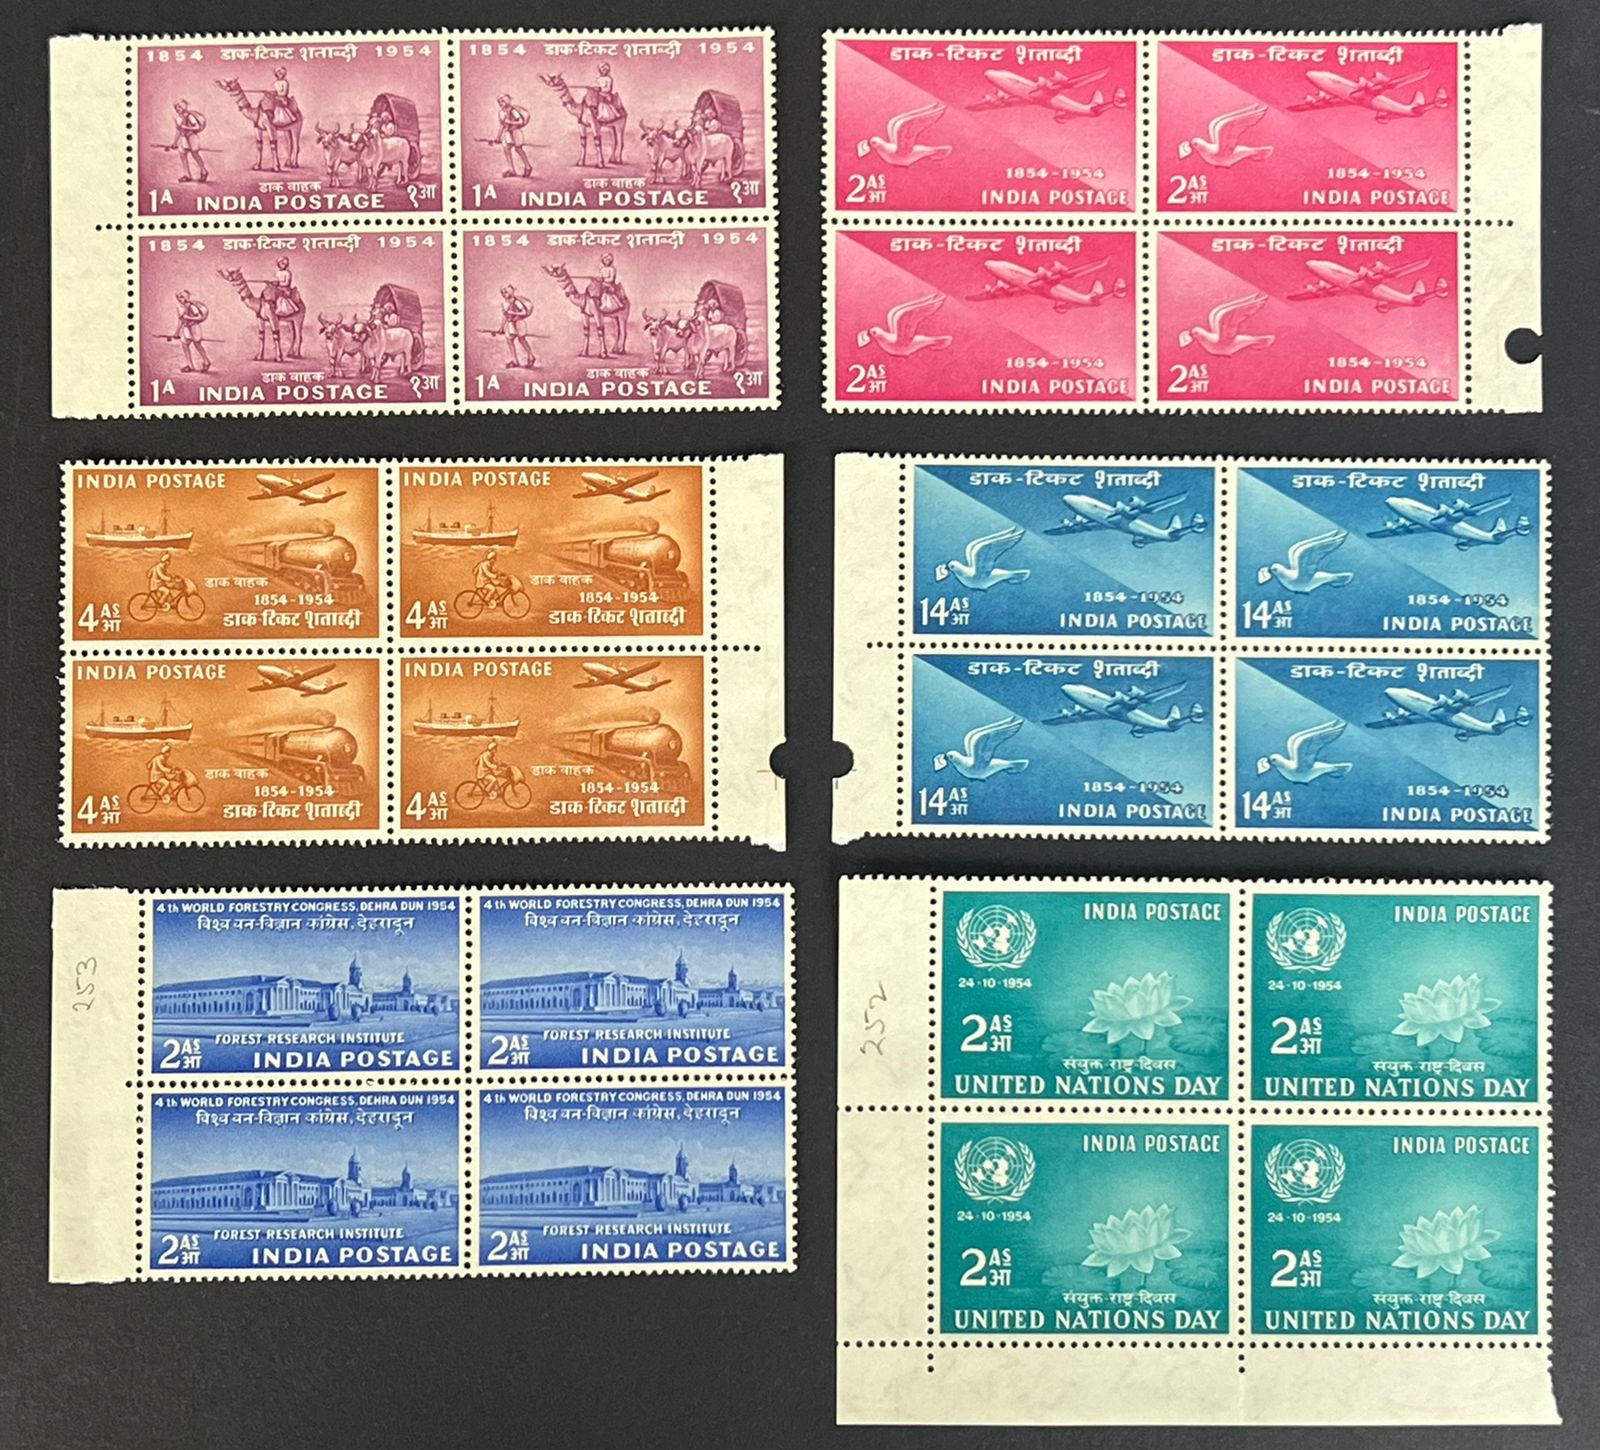 India 1954 Year Set Stamp Centenary Complete Blocks of 4 MNH White Gum Cat